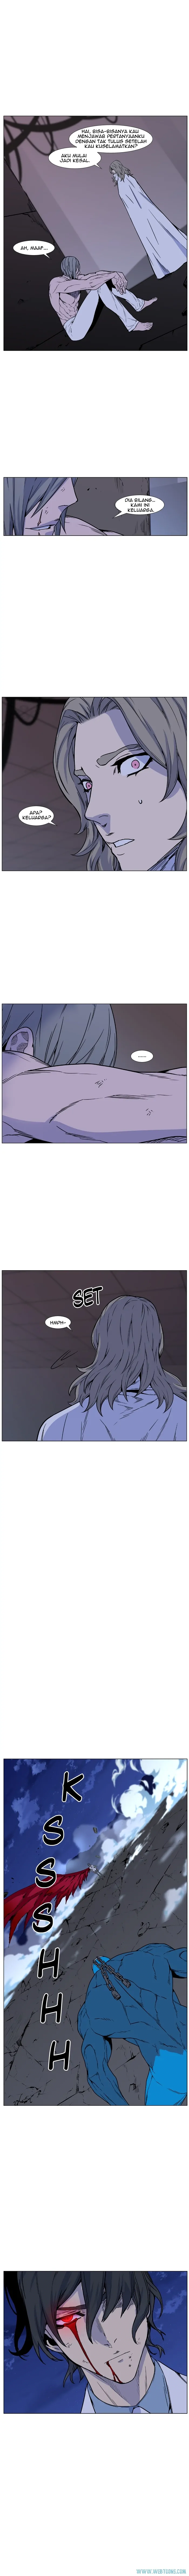 Noblesse Chapter 444 - 95